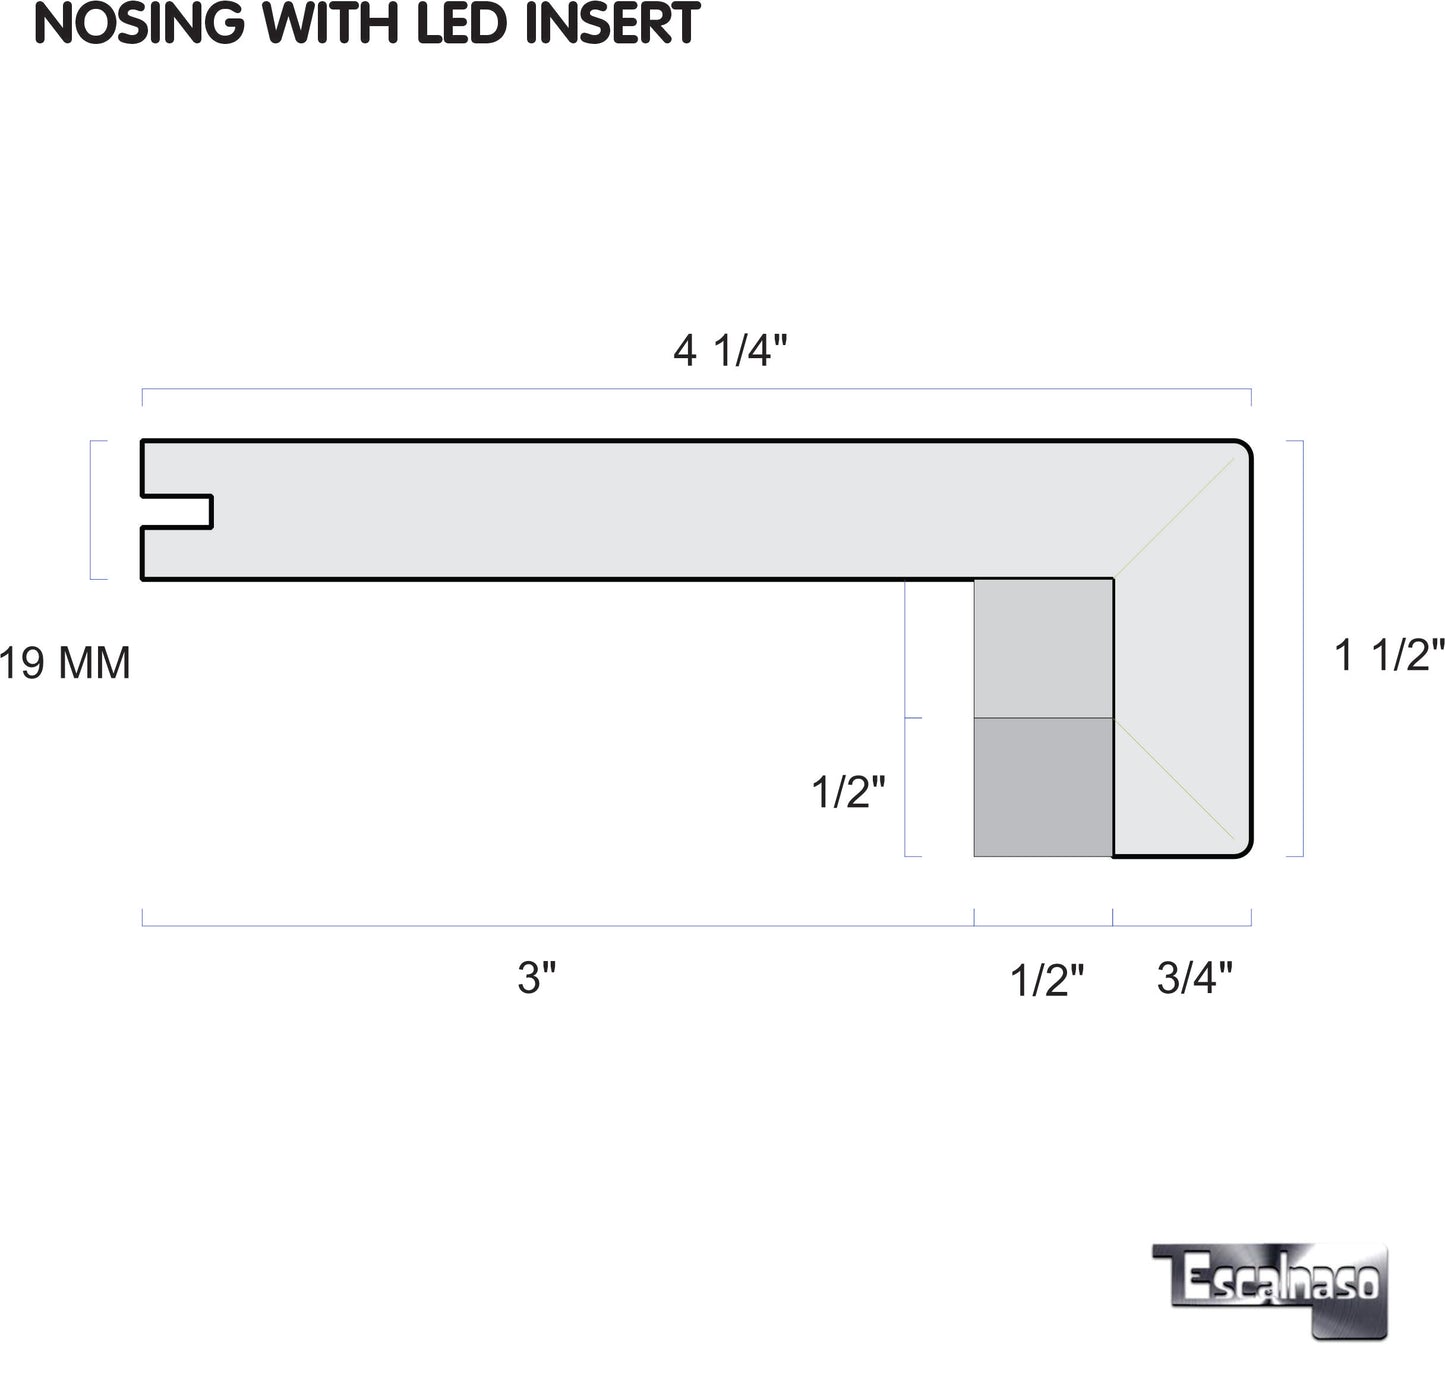 (10003) FABRICATED NOSING WITH LED INSERT